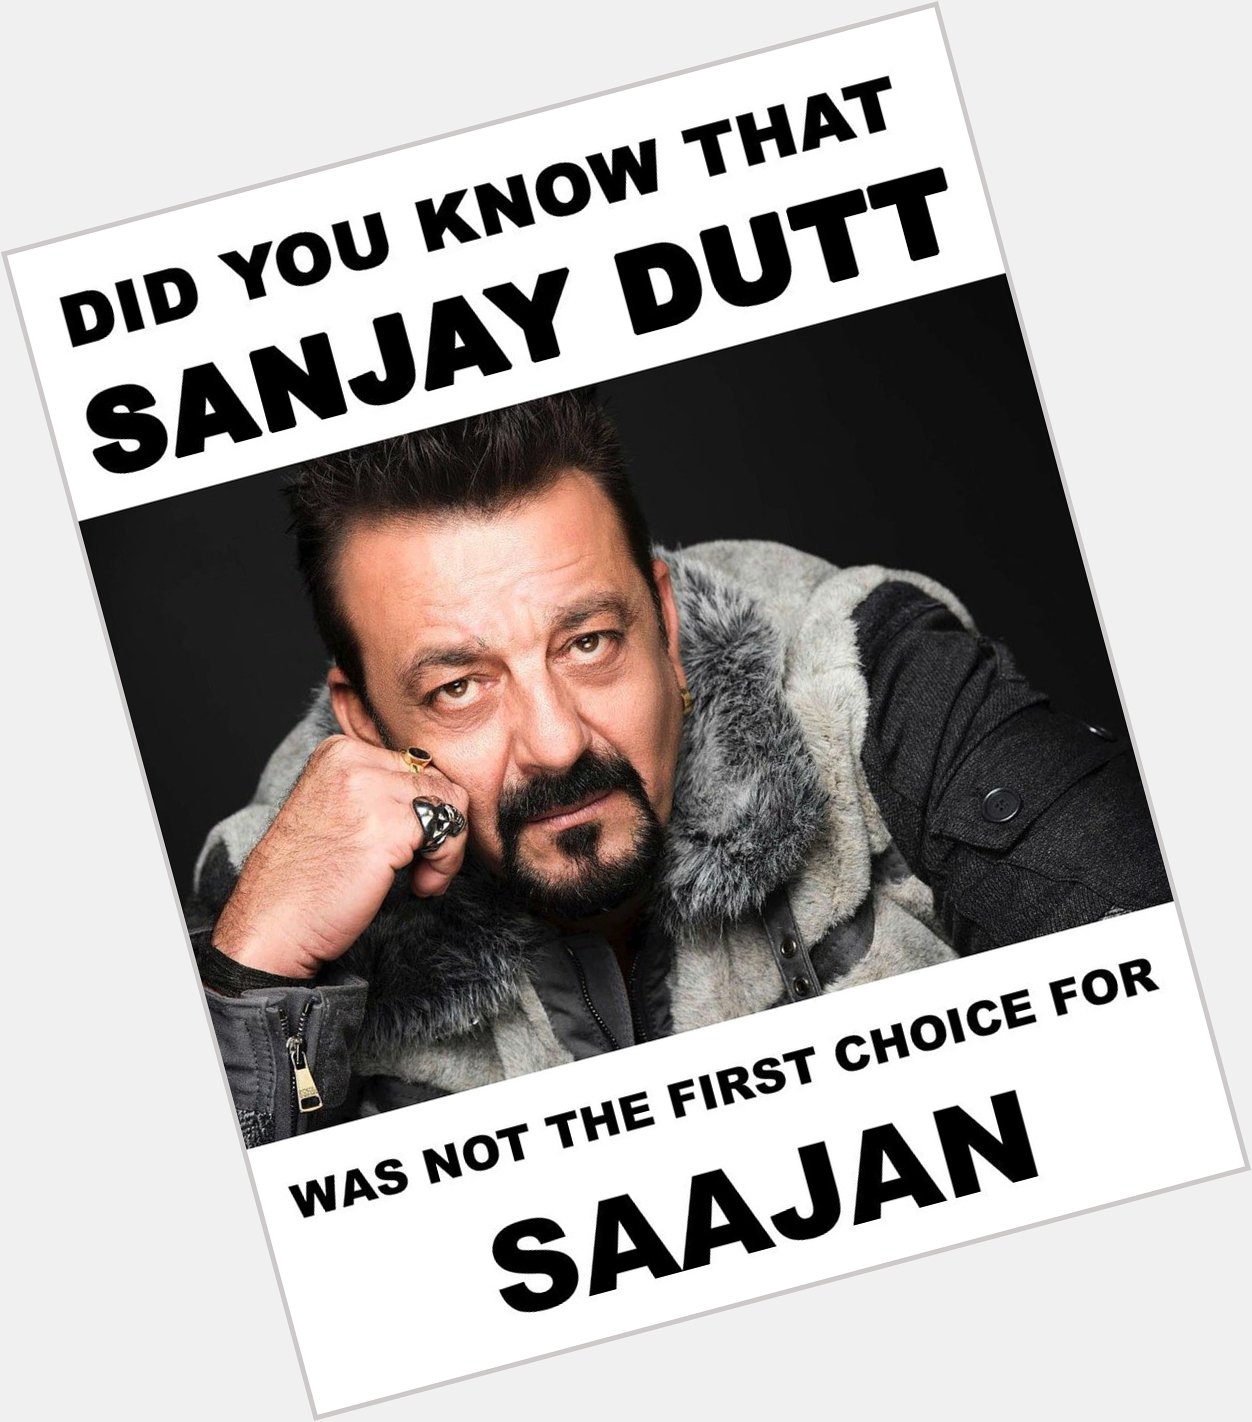 Here is wishing Sanjay Dutt of Bollywood a very happy birthday.  